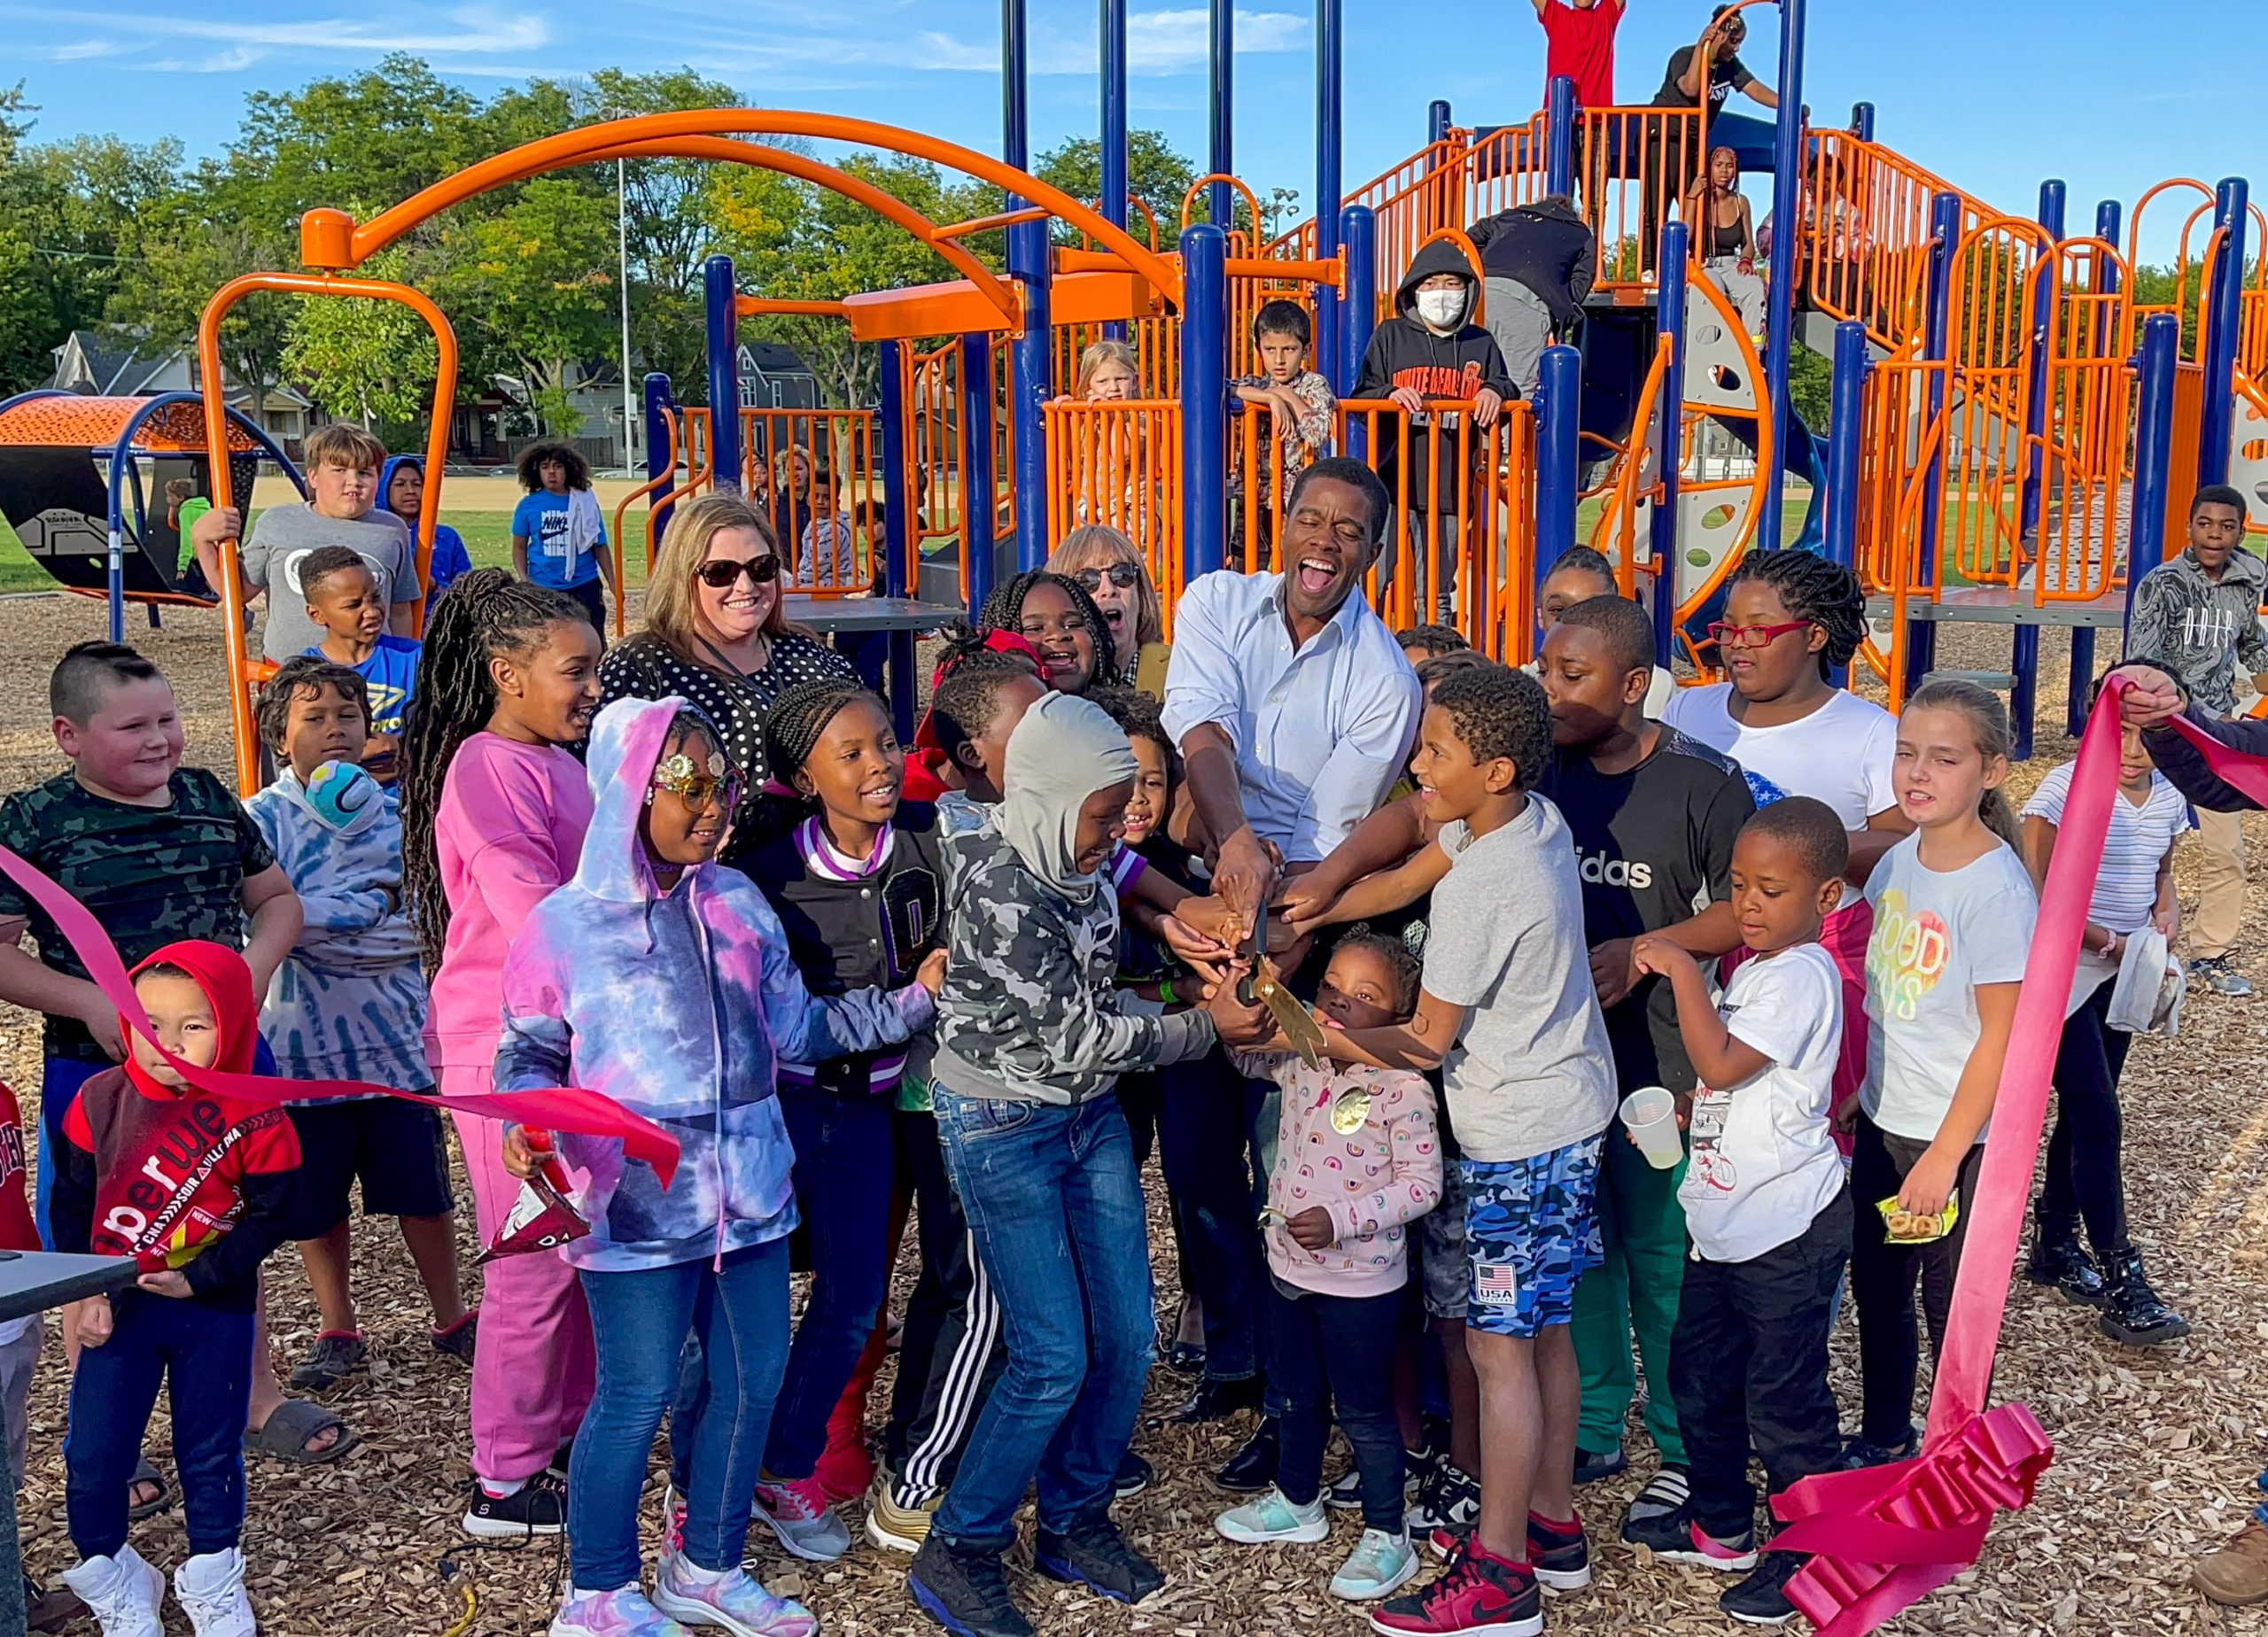 The St. Paul Mayor and a group of kids cutting a ribbon at a new park